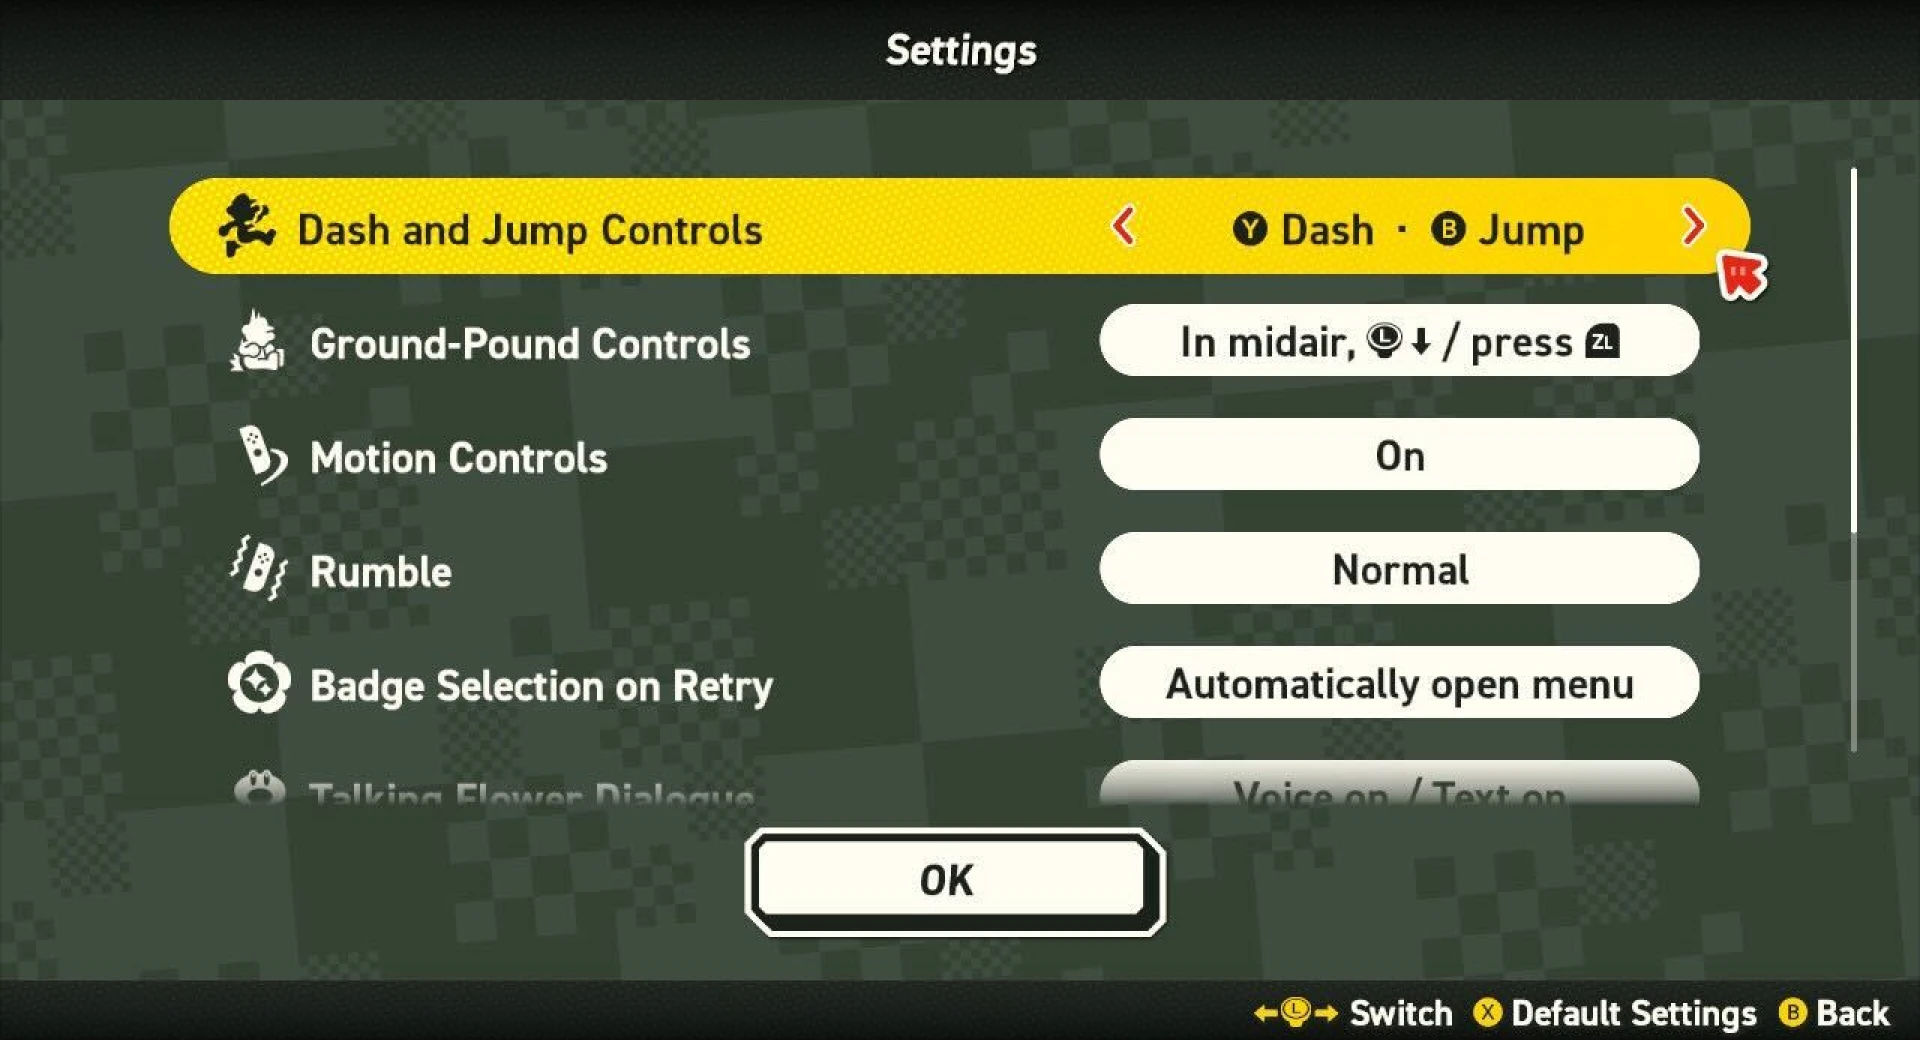 The Super Mario Bros. Wonder settings screen is shown with options for changing button combinations, motion controls, rumble, and more.